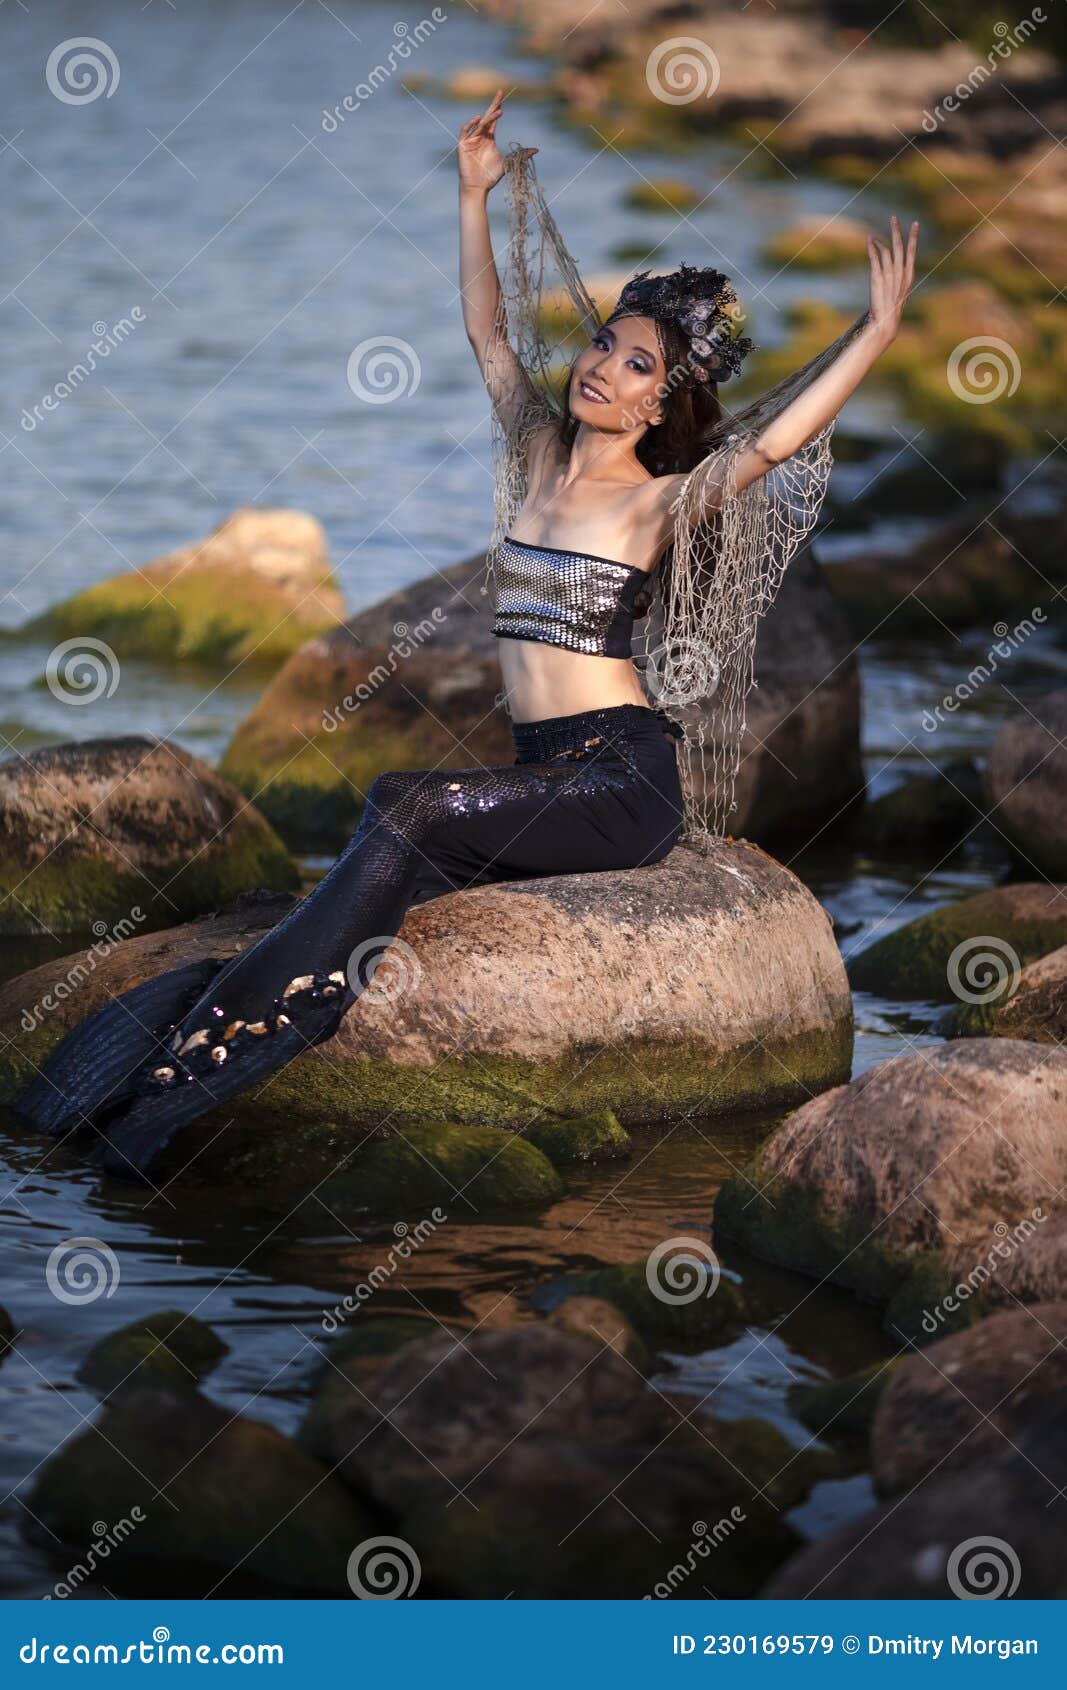 Asian Mermaid with Net at Sea Coast on Rocks while Wearing